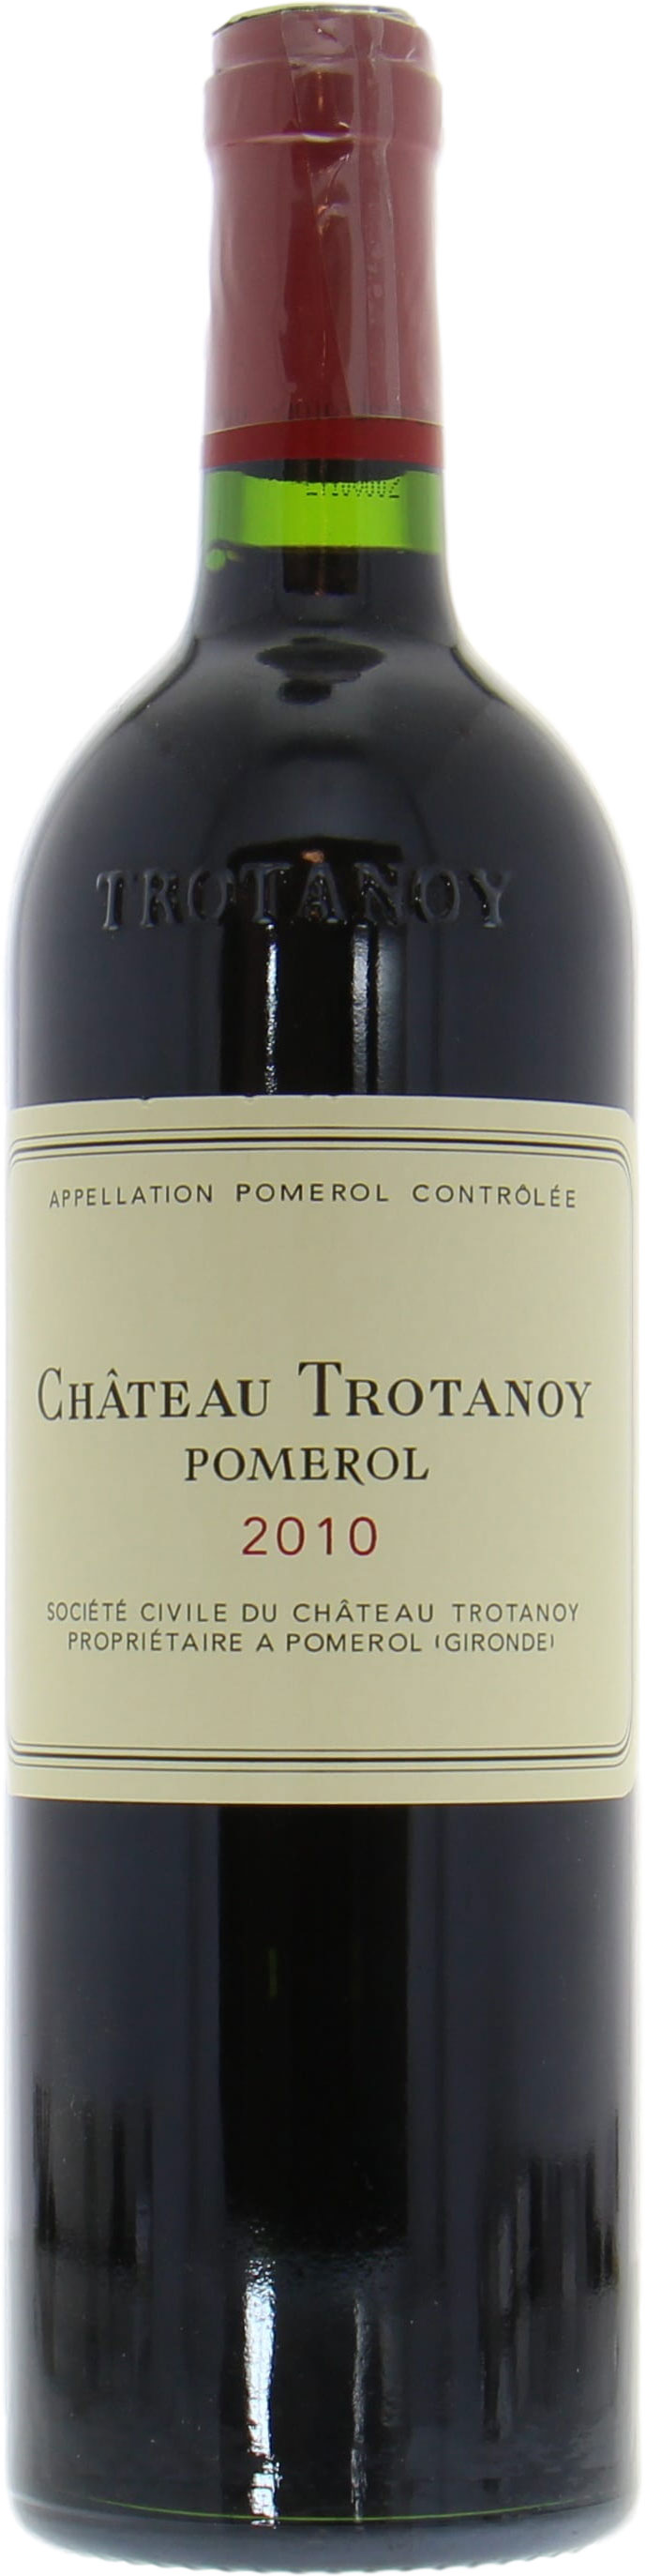 Chateau Trotanoy - Chateau Trotanoy 2010 In OWC of 2 bottles